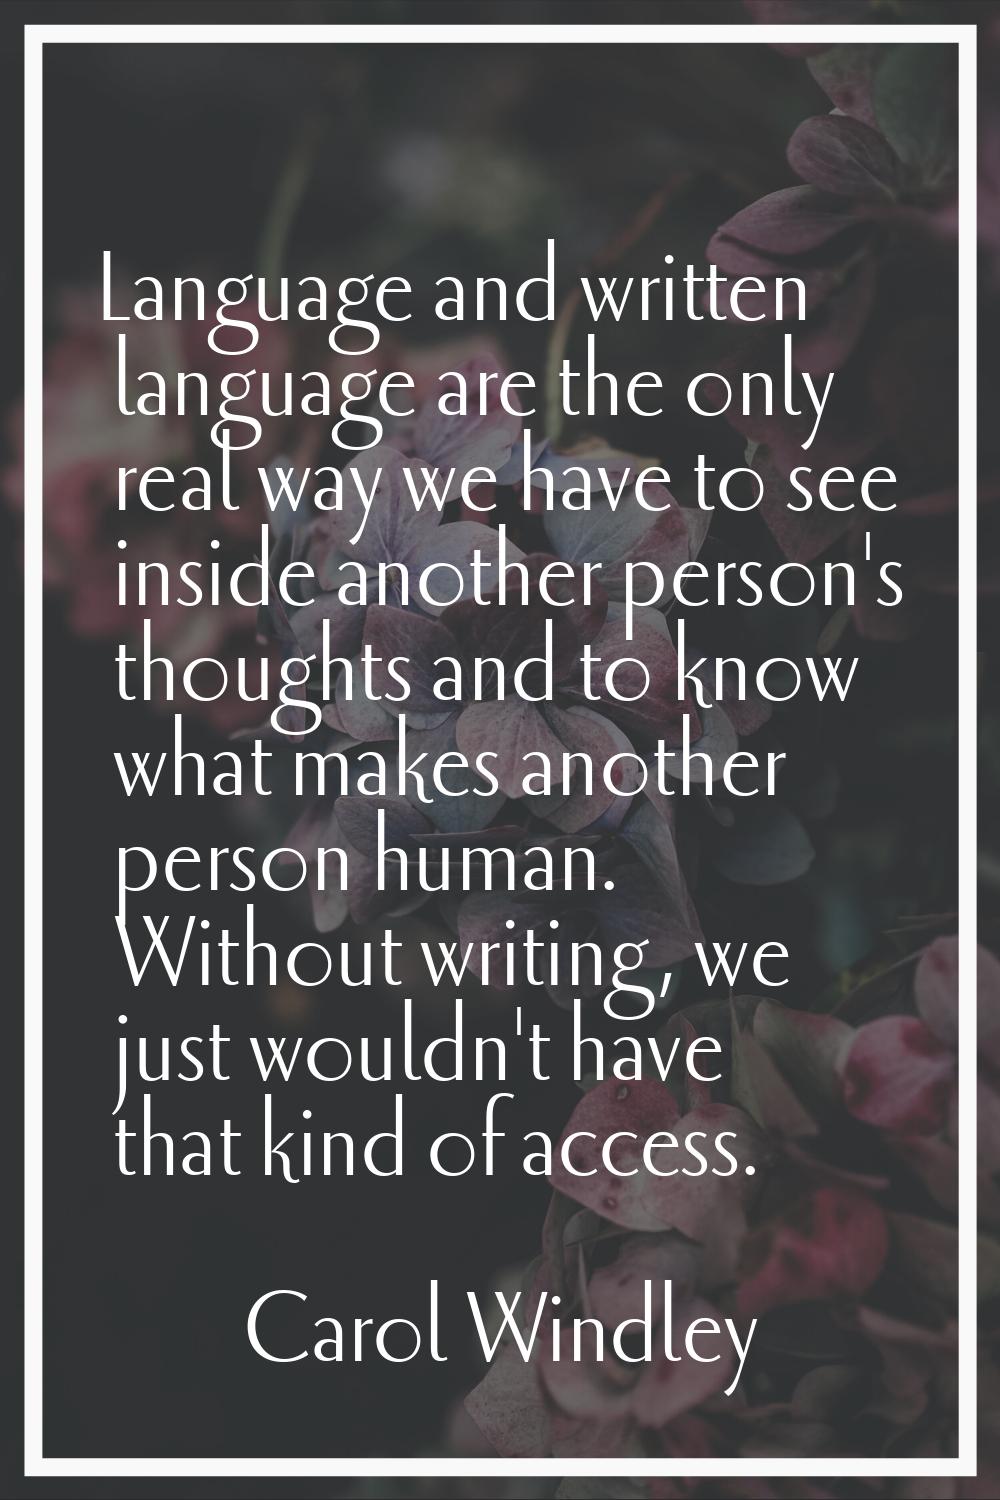 Language and written language are the only real way we have to see inside another person's thoughts